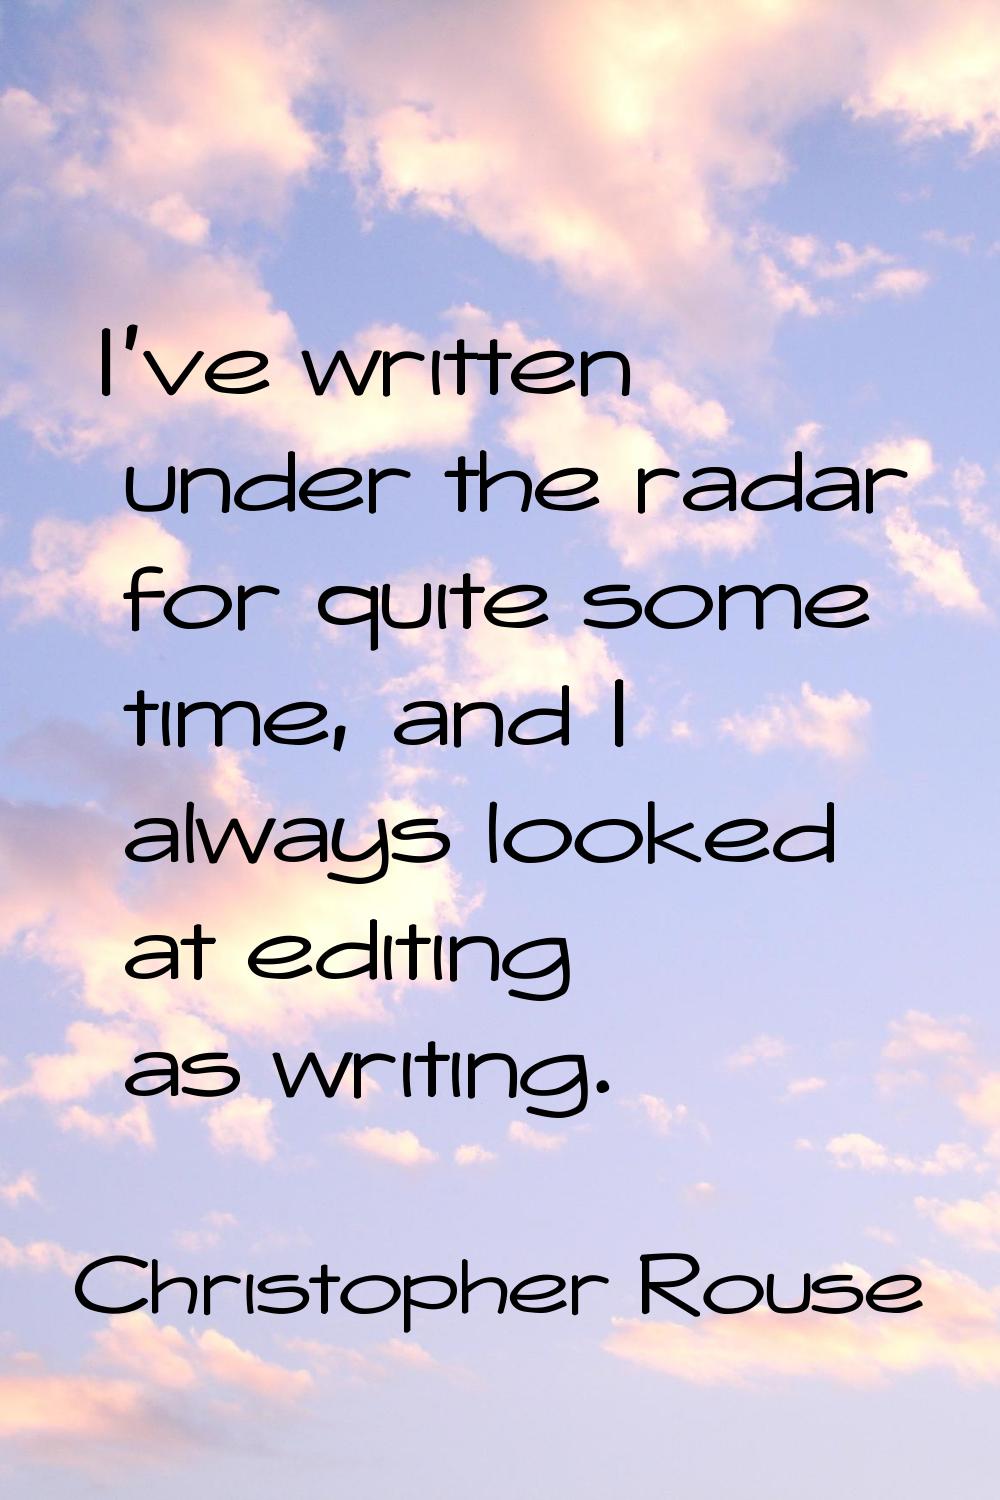 I've written under the radar for quite some time, and I always looked at editing as writing.